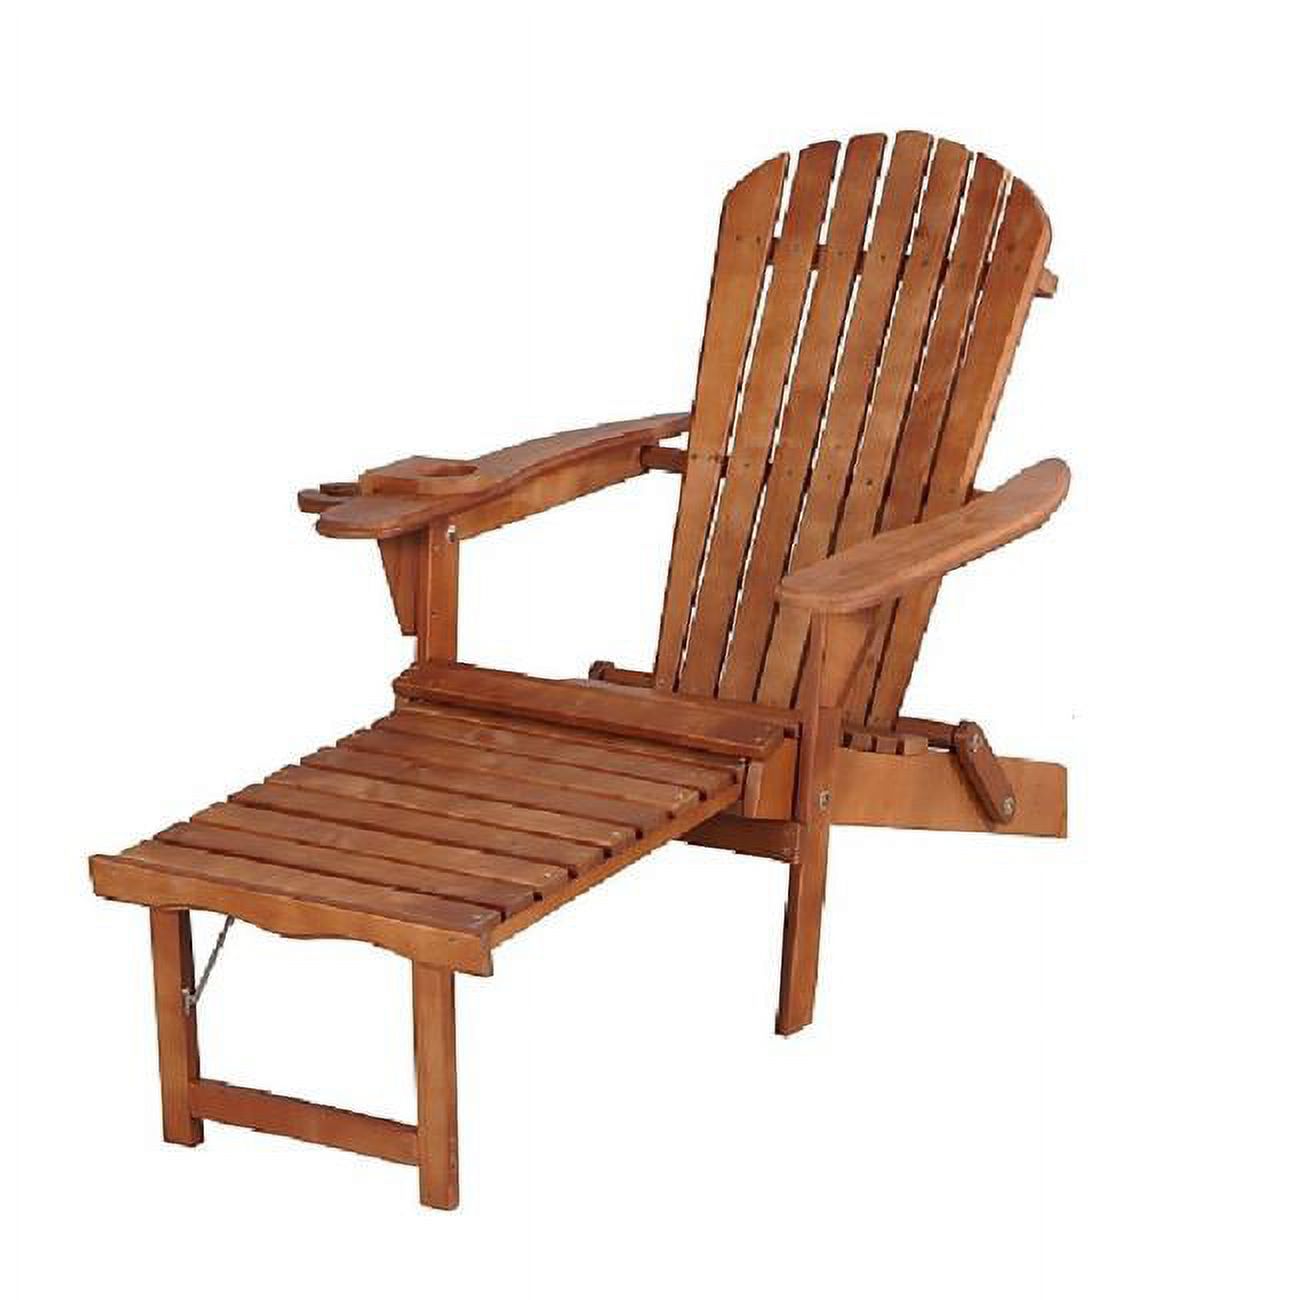 63 in. Oceanic Collection Adirondack Chaise Lounge Chair Foldable, Cup & Glass Holder, Walnut - image 1 of 1